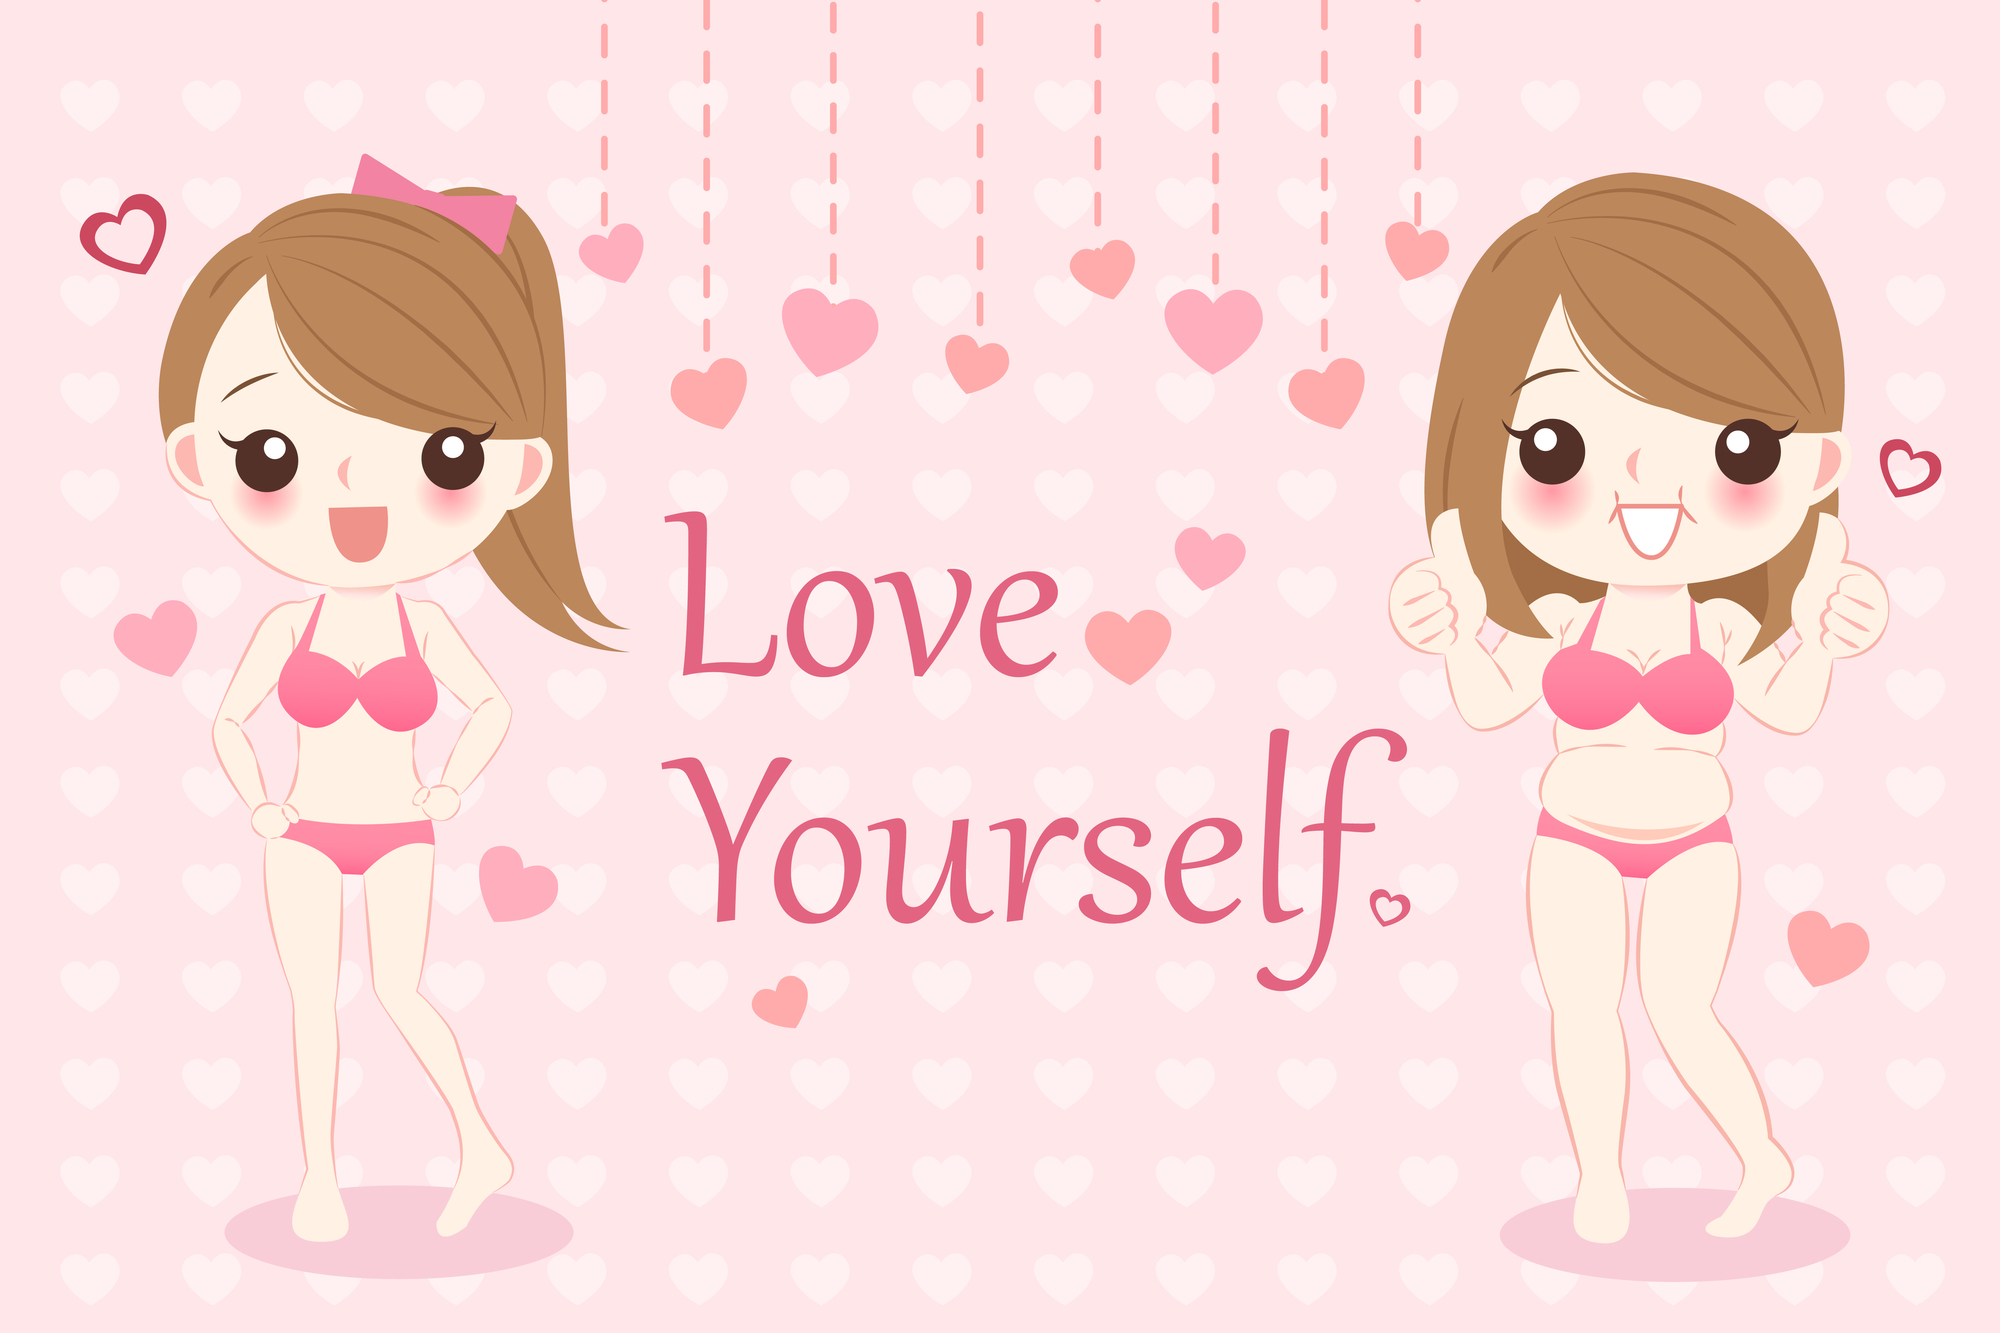 Love Your self　下着女性のイラスト